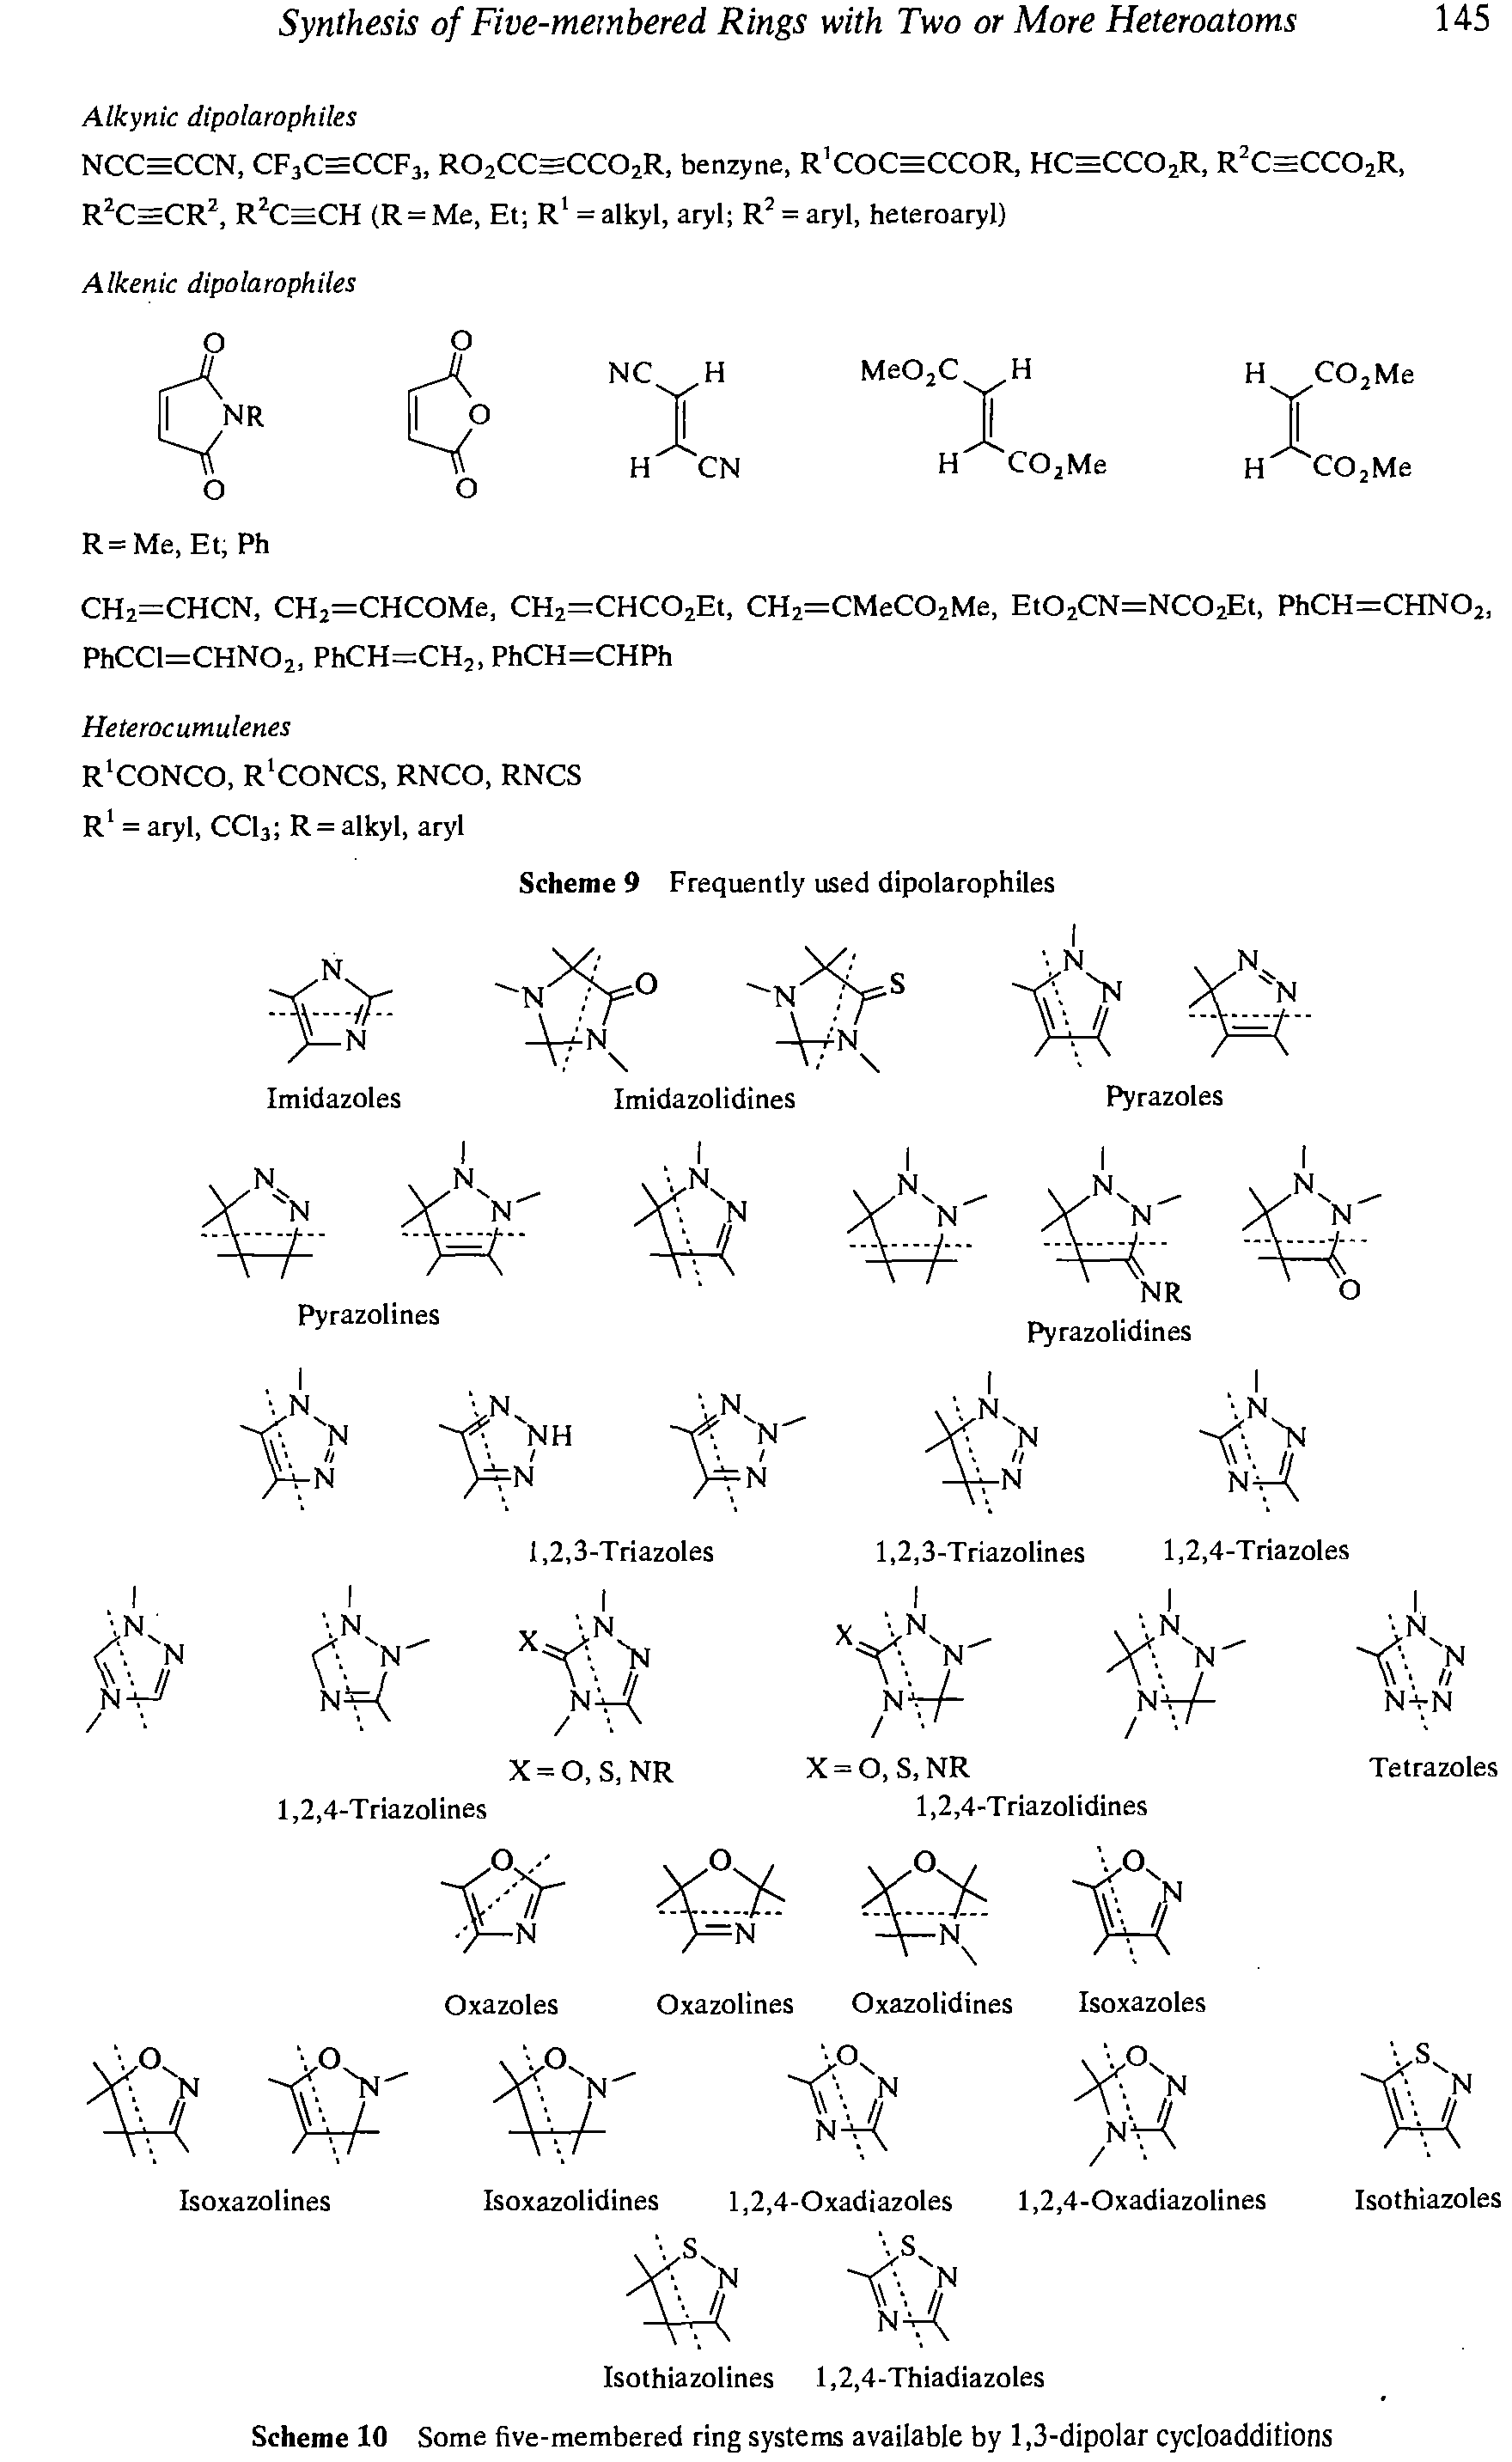 Scheme 10 Some five-membered ring systems available by 1,3-dipolar cycloadditions...